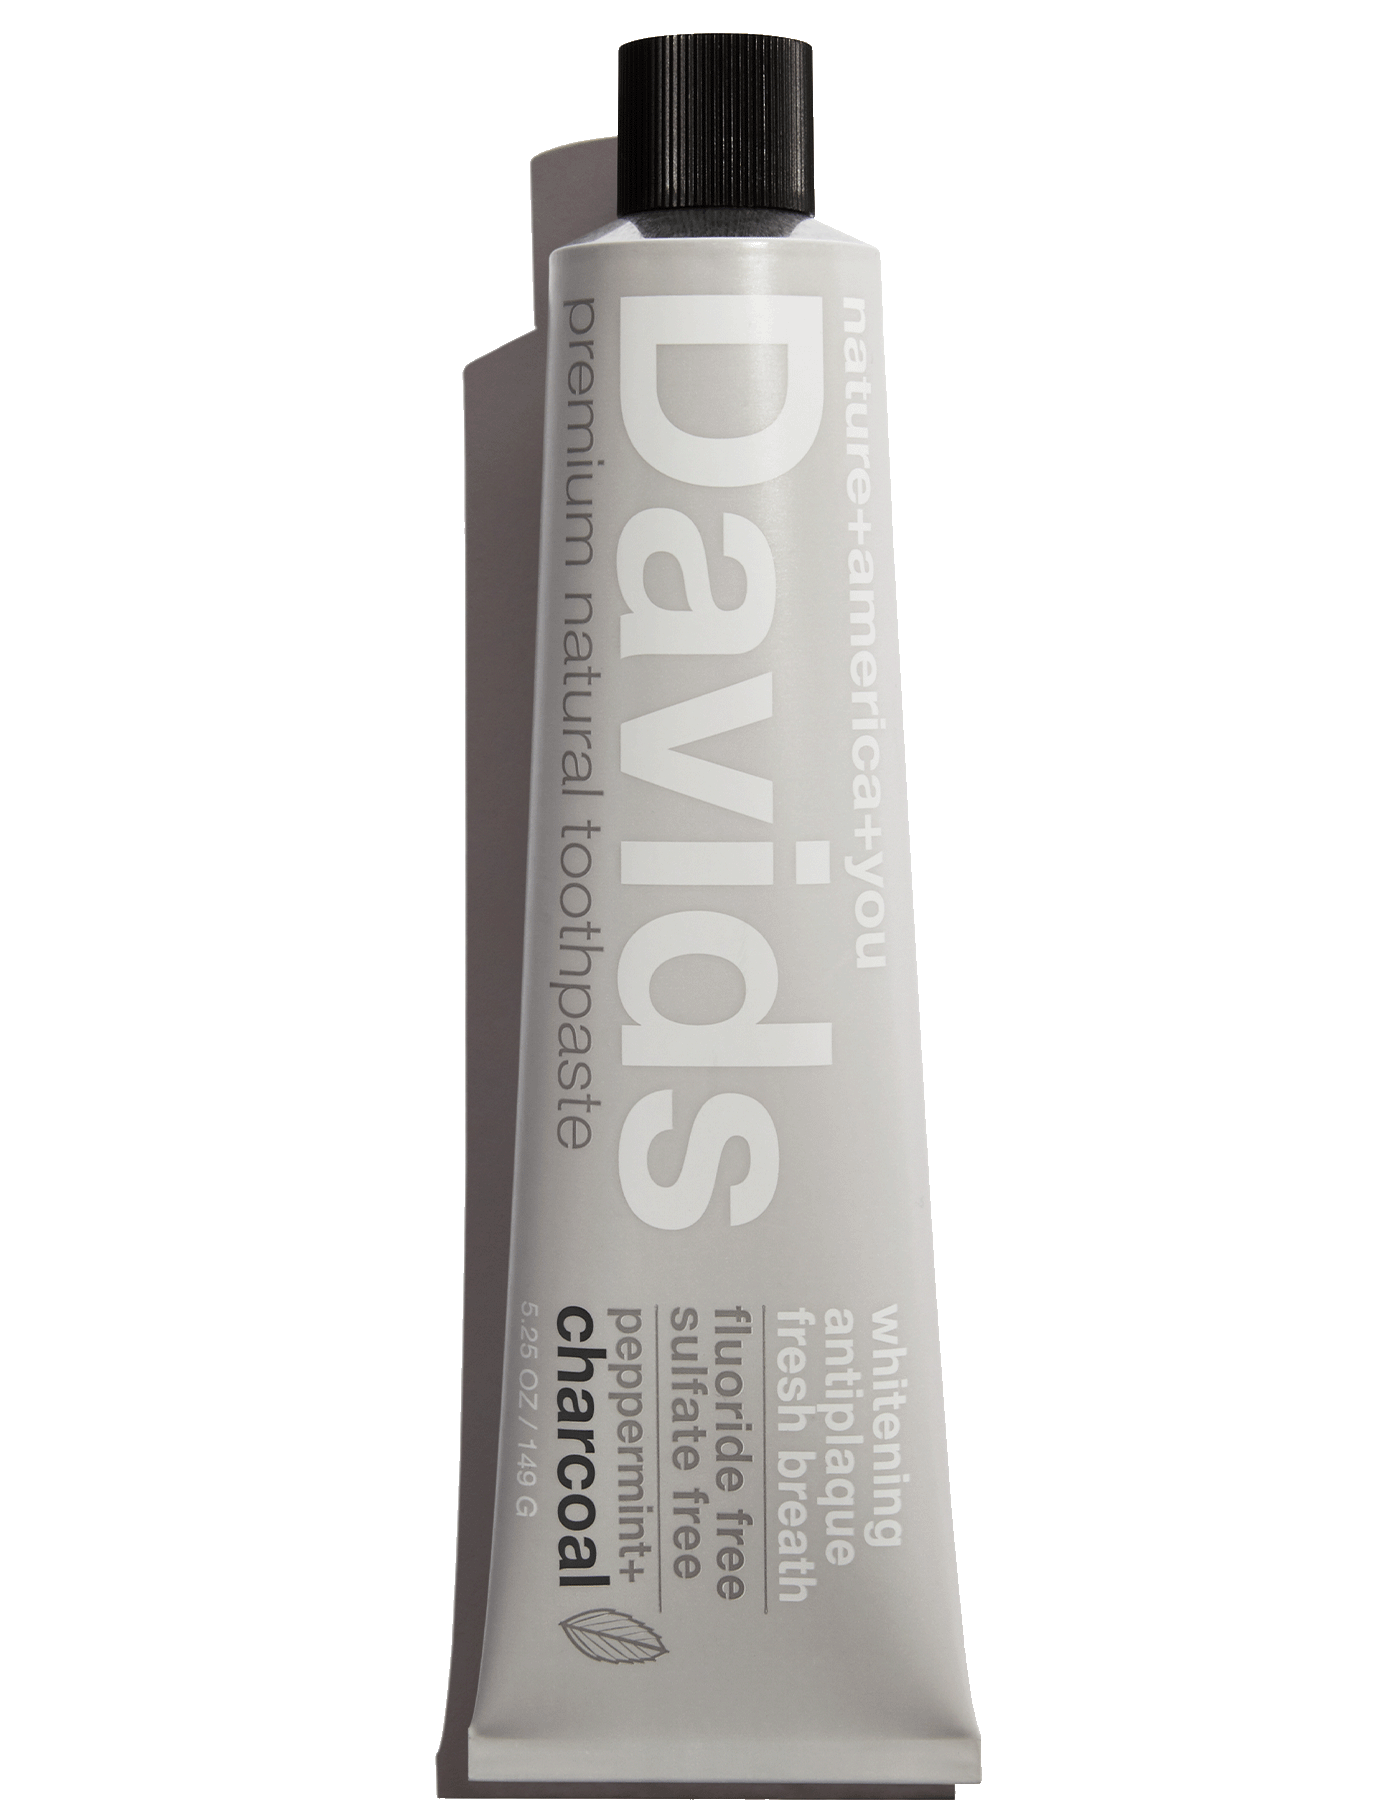 Davids Premium Toothpaste - Charcoal + Peppermint